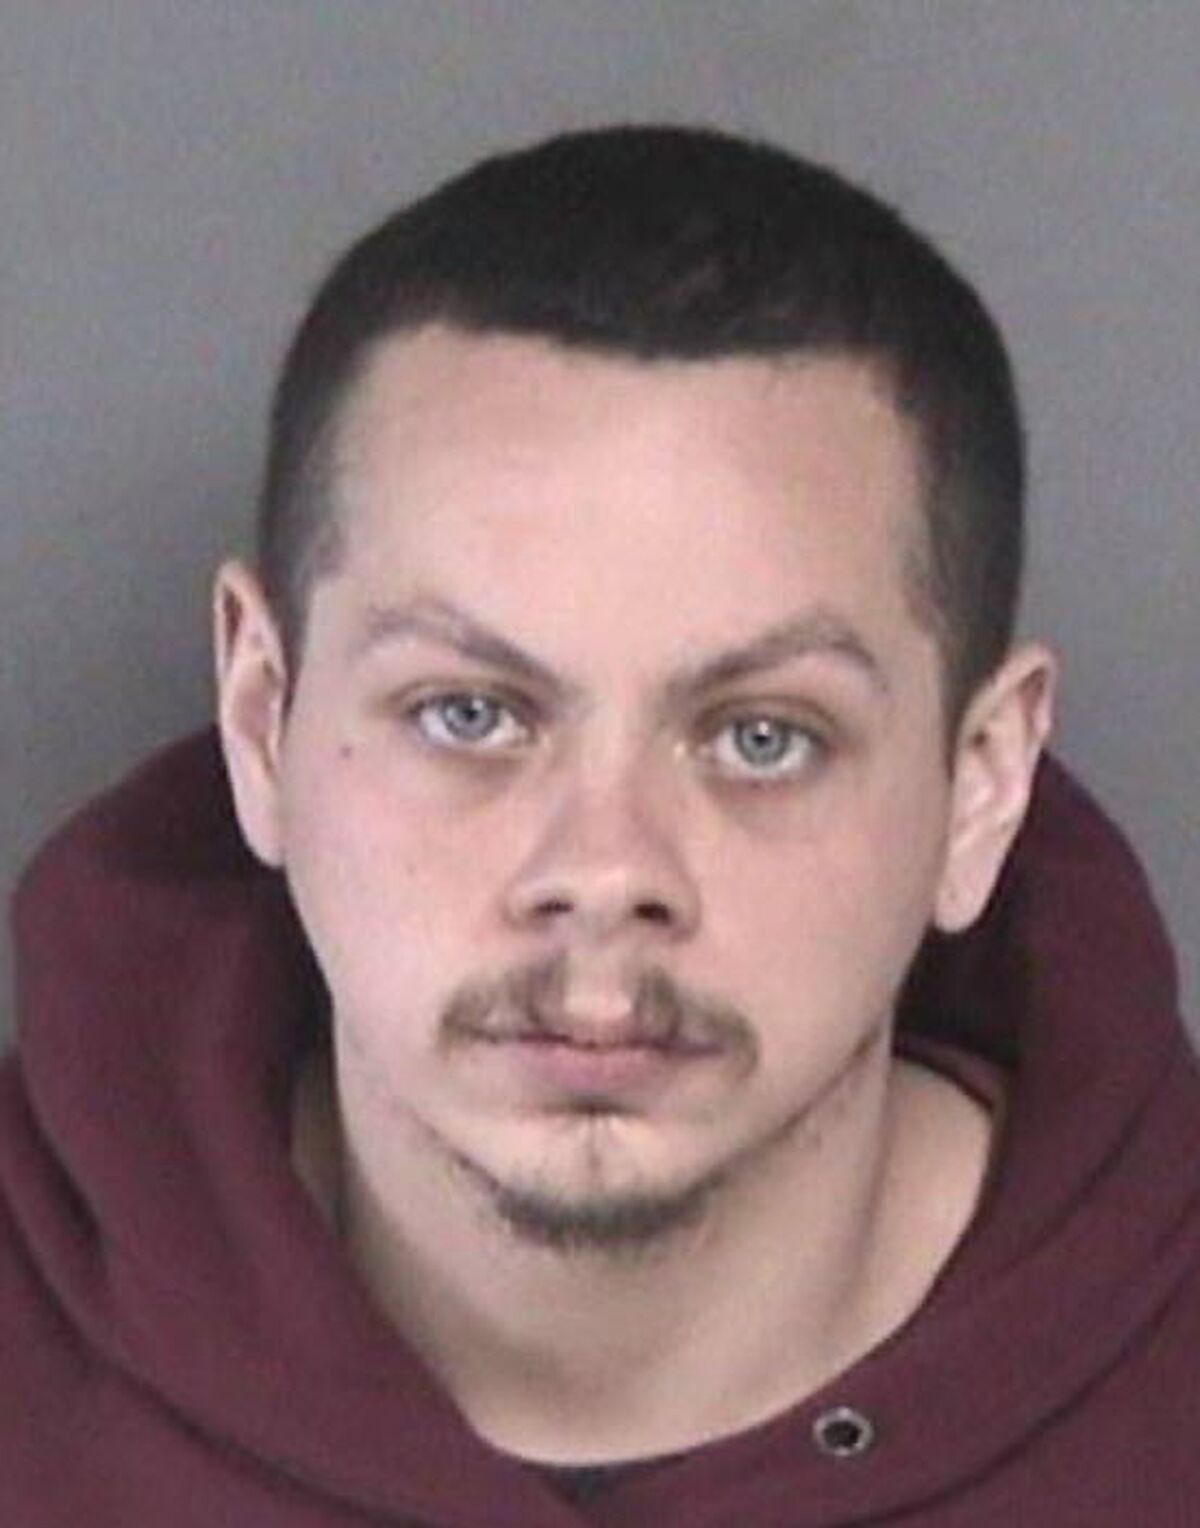 Shooting suspect Juan Angel Garcia, 25, from San Francisco, arrested in the I-880 freeway shooting death of Gene Ransom, is booked Saturday, Feb. 5, 2022, on suspicion of murder at Alameda County Jail in Dublin, Calif. The driver struck and killed by gunfire while traveling on a San Francisco Bay Area highway has been identified as Gene Ransom, a basketball star at the University of California, Berkeley in the 1970s and a member of the Cal Athletics hall of fame. (Alameda County Sheriff's Office via AP)